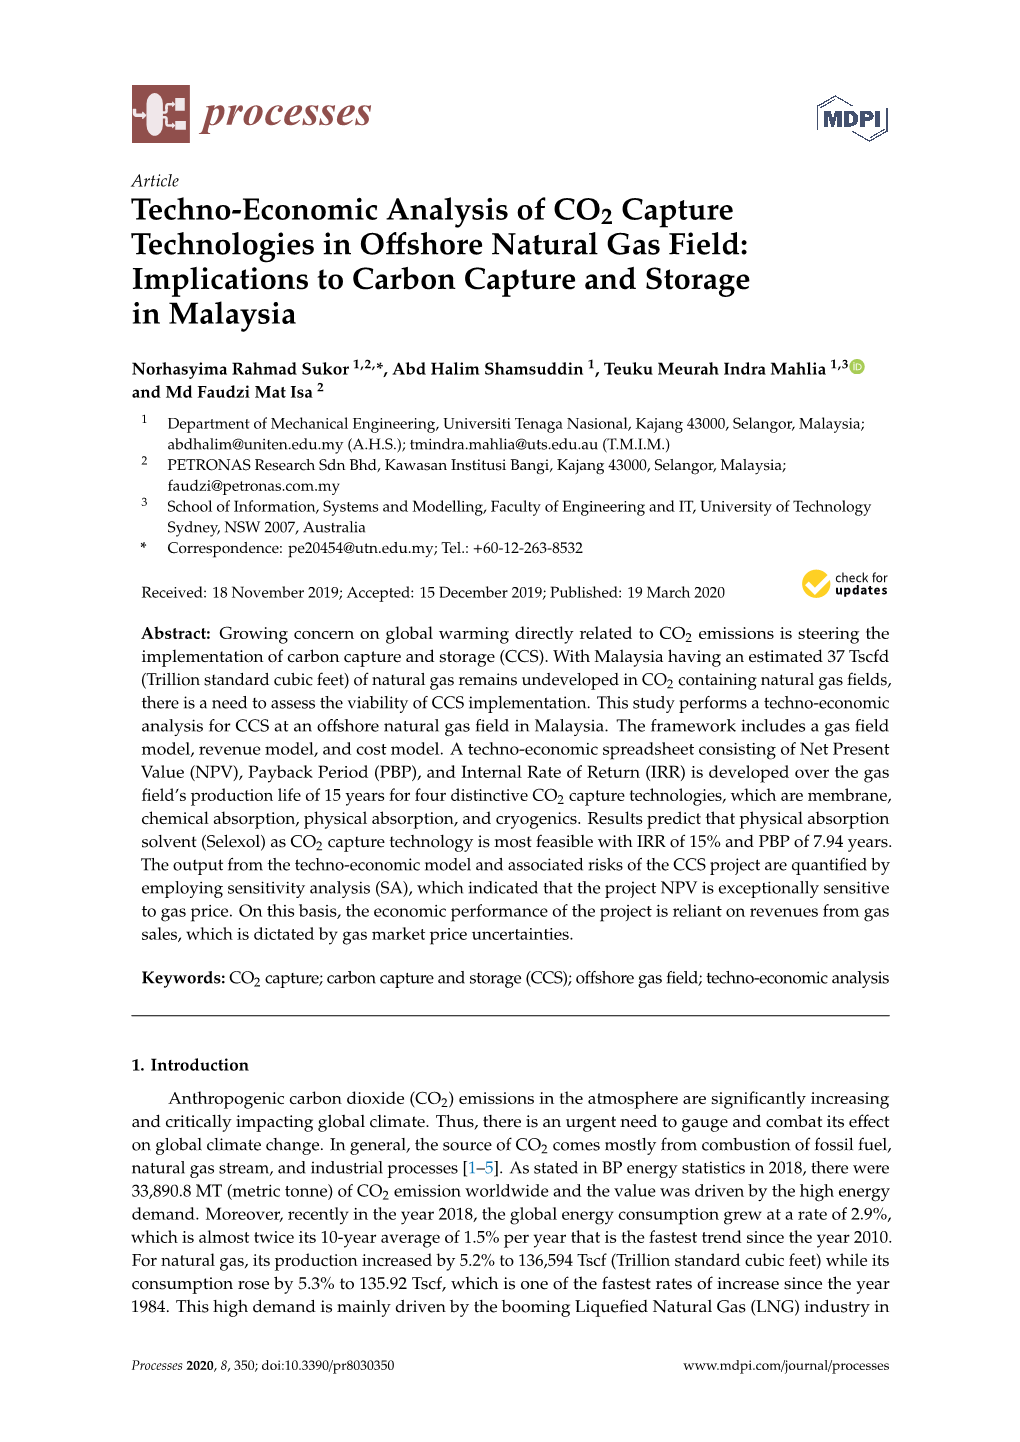 Techno-Economic Analysis of CO2 Capture Technologies in Offshore